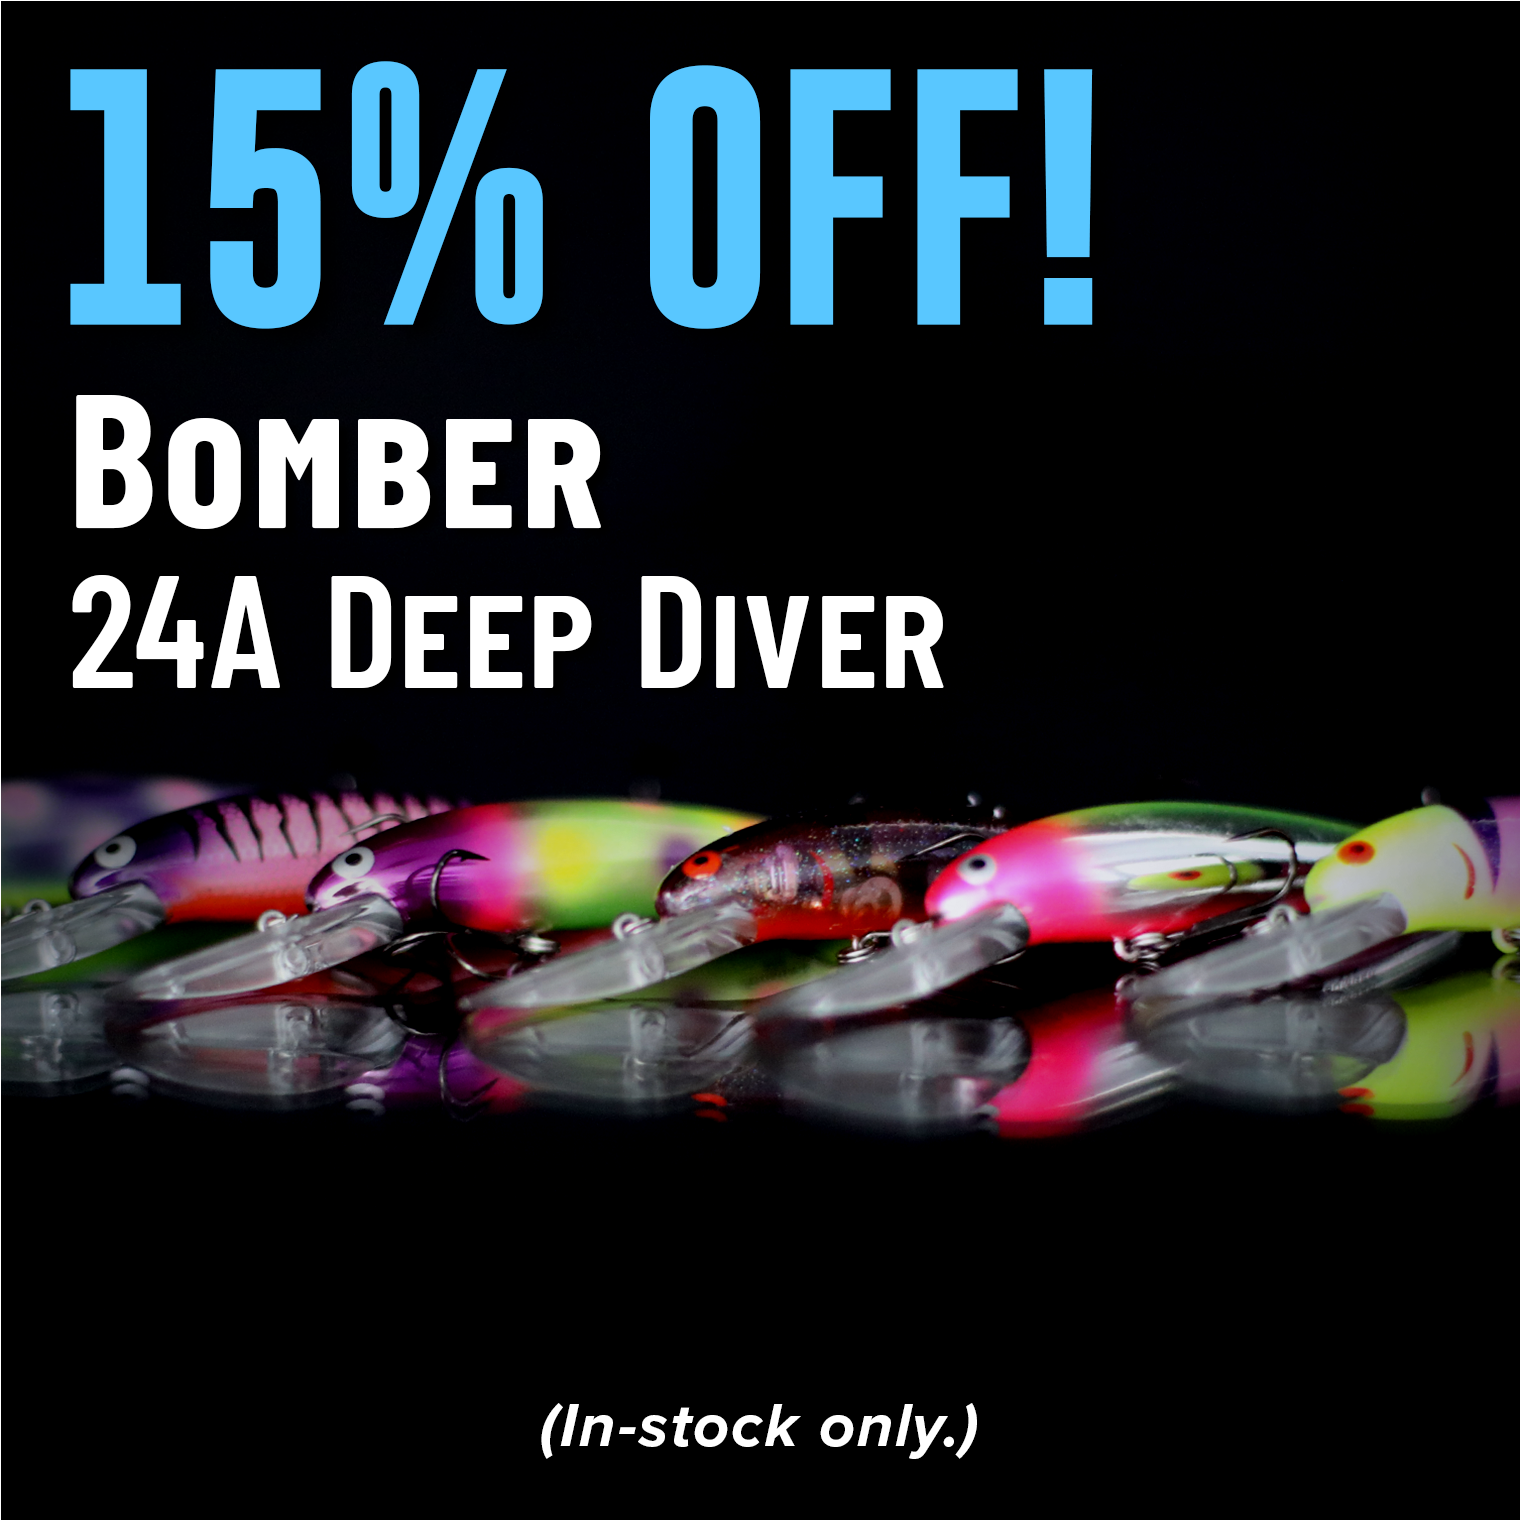 15% Off! Bomber 24A Deep Diver (In-stock only.)